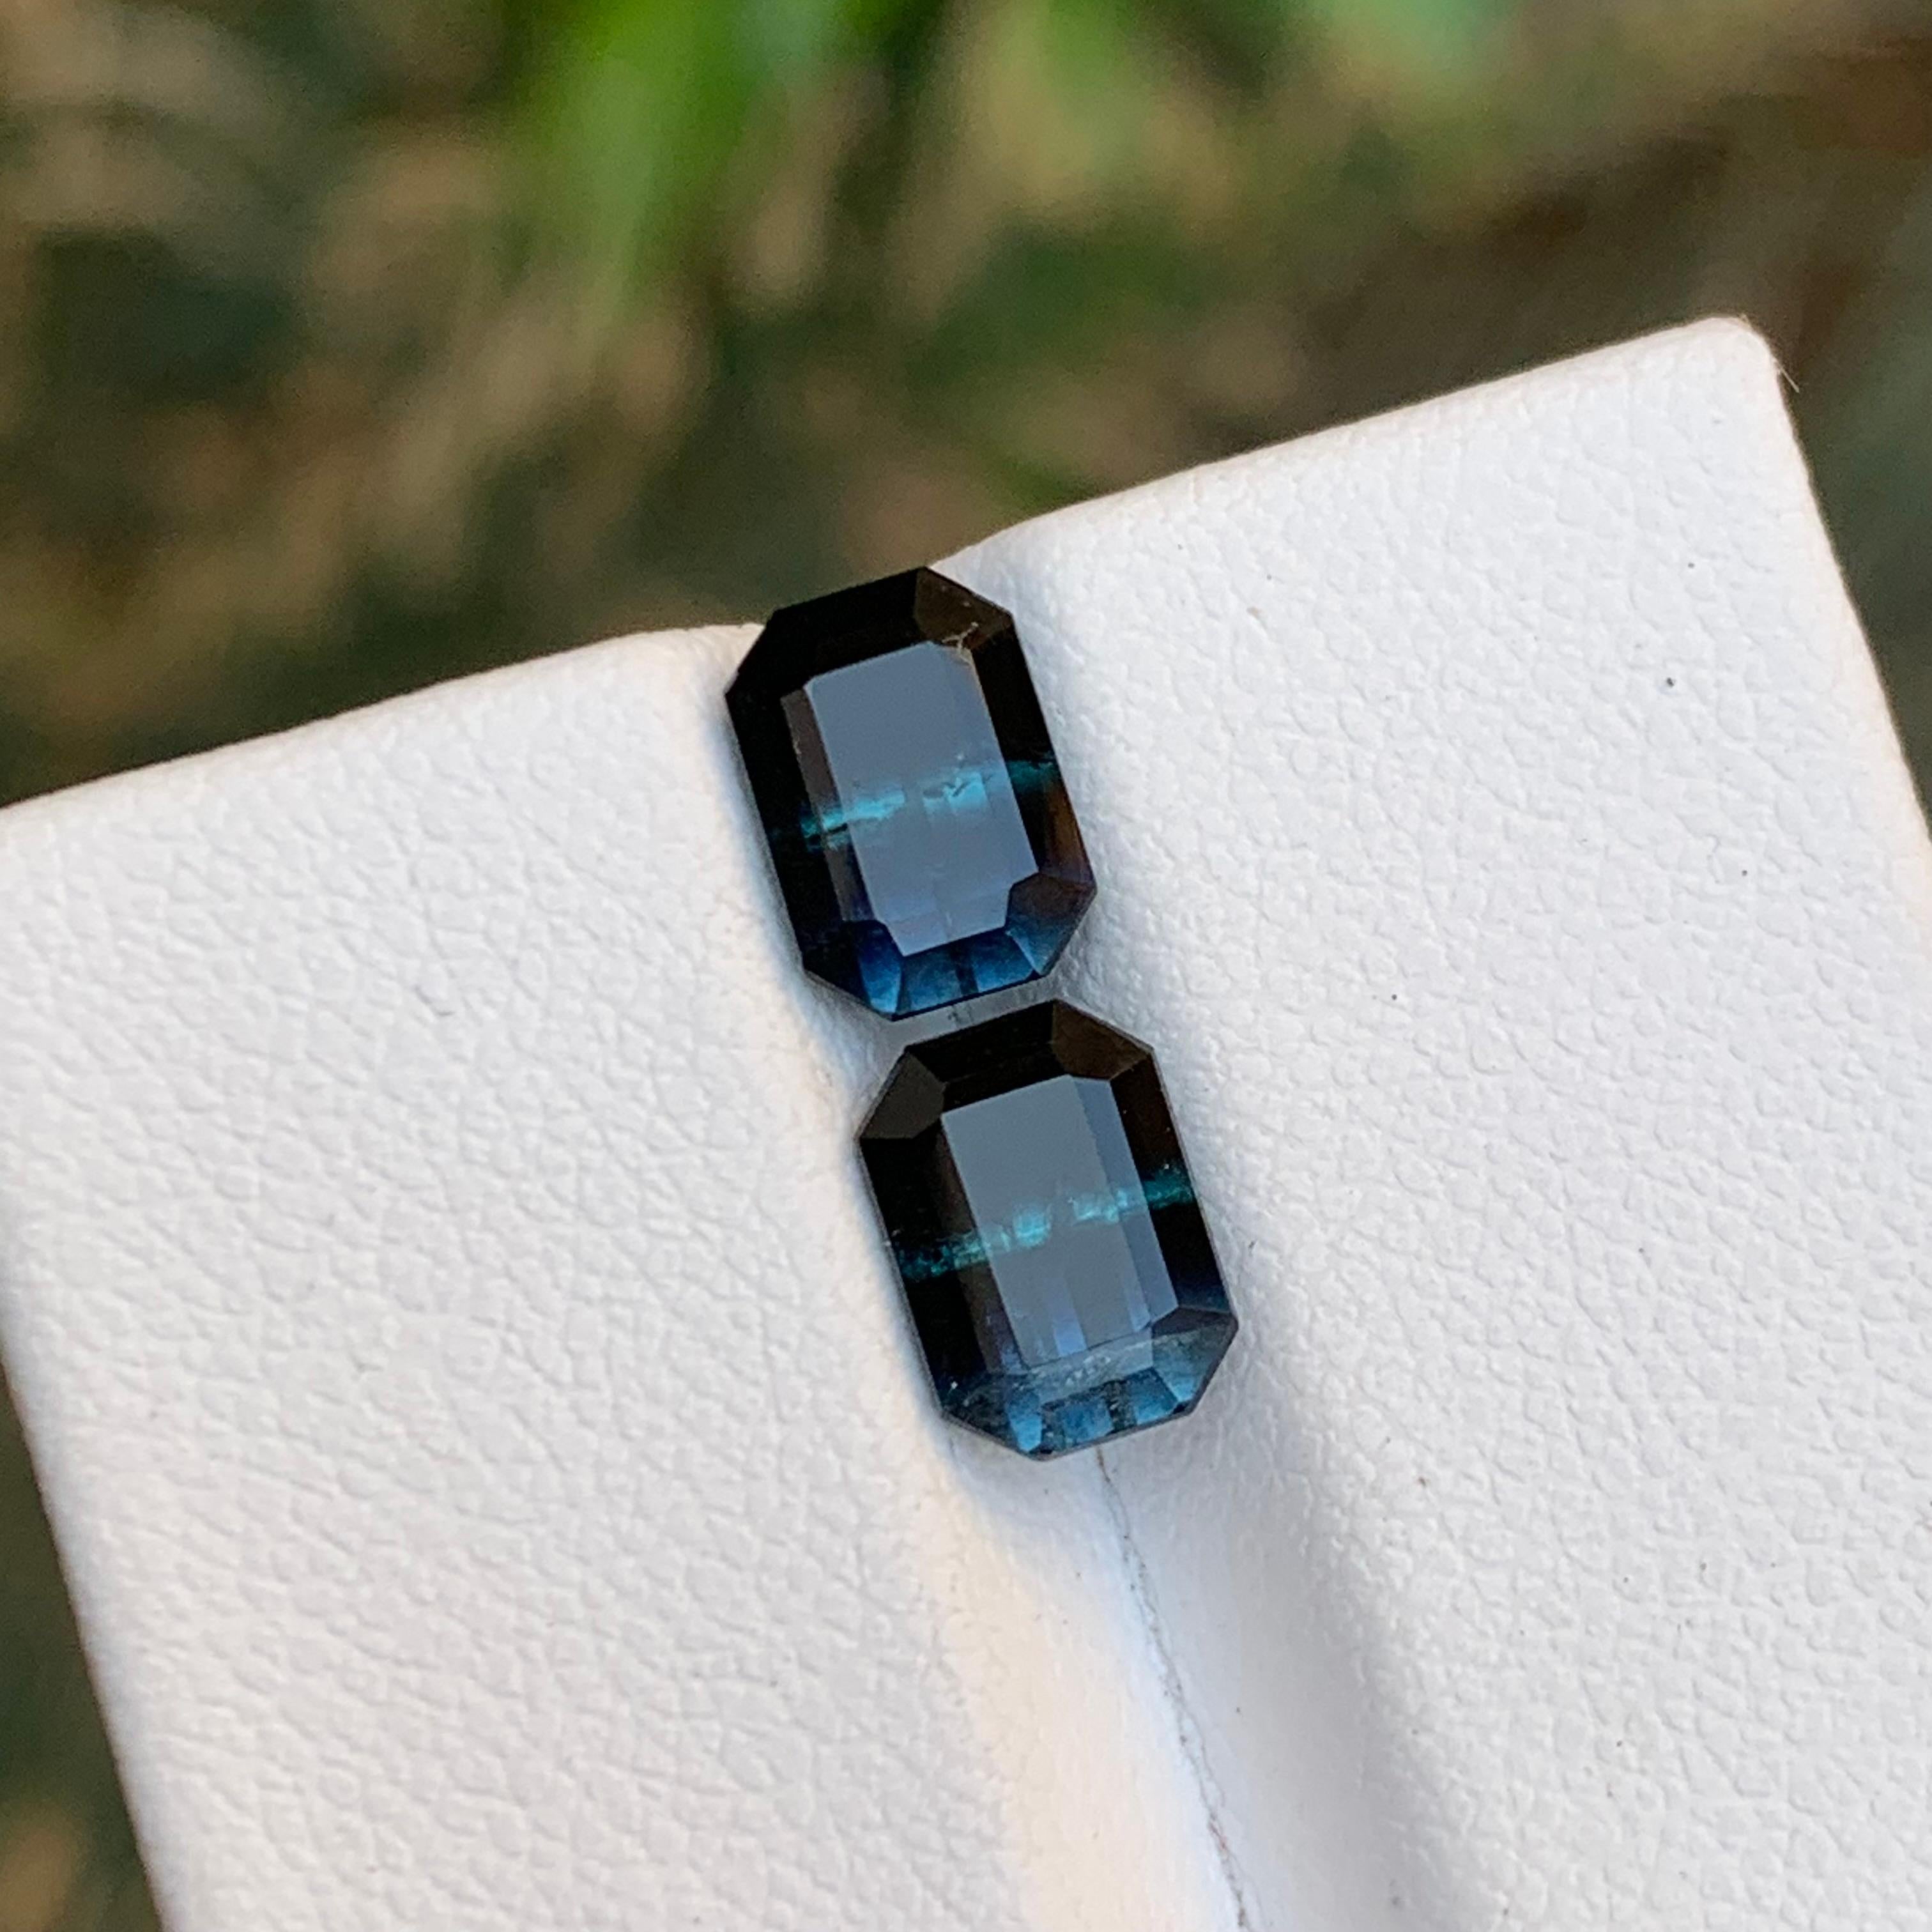 GEMSTONE TYPE: Tourmaline
PIECE(S): Pair
WEIGHT: 3.40 Carats
SHAPE: Emerald
SIZE (MM): 
1.70 Carat: 7.86 x 5.52 x 4.53
1.70 Carat: 7.85 x 5.62 x 4.56
COLOR: Bicolor Black and Blue
CLARITY: Slightly Included
TREATMENT: None
ORIGIN: